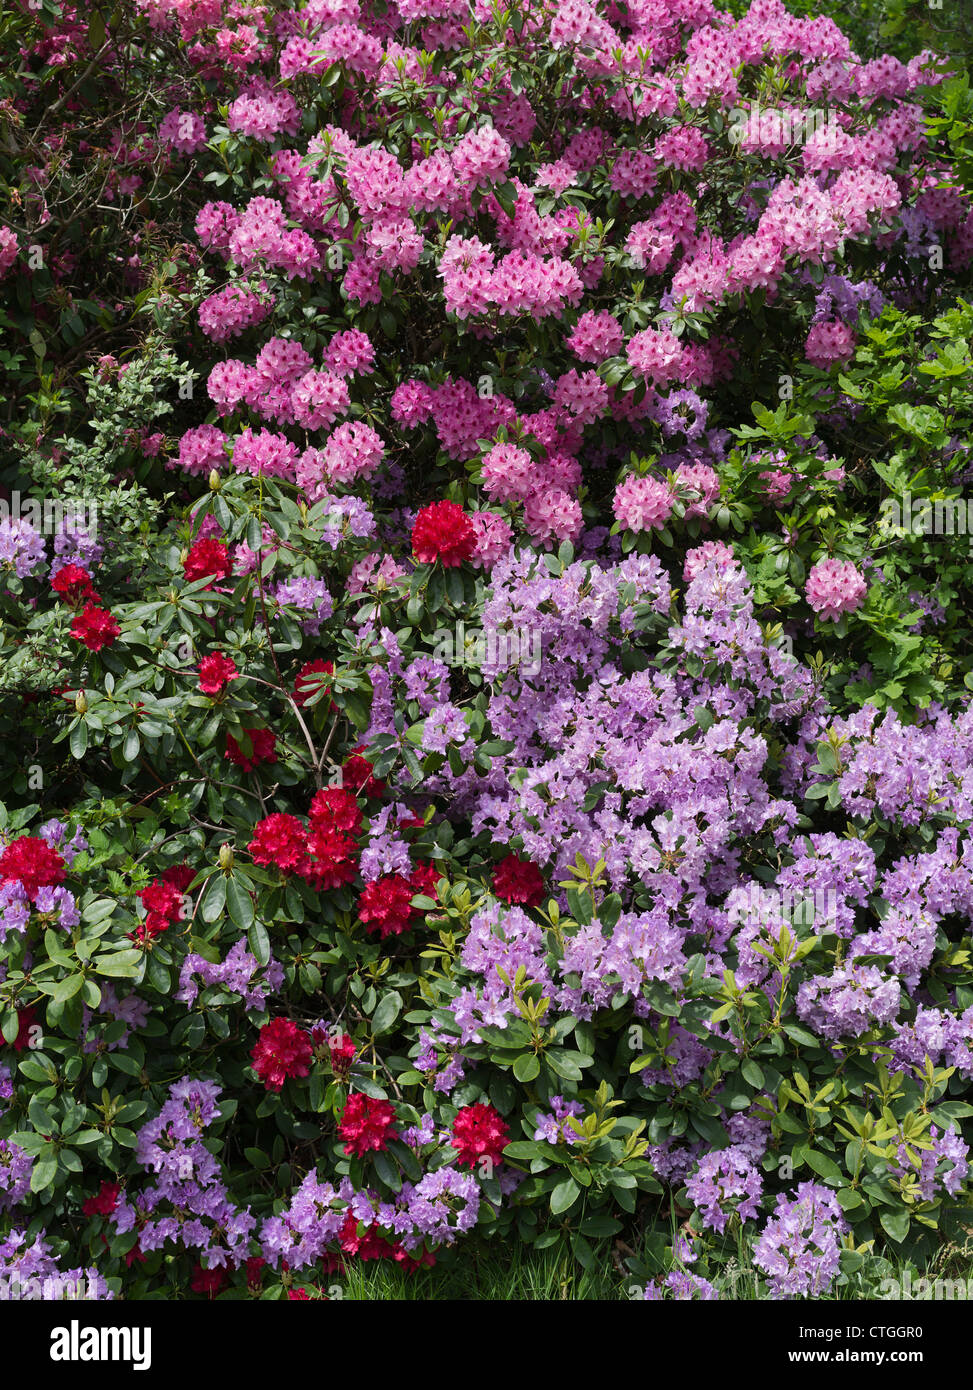 Rhododendron Garden Uk High Resolution Stock Photography And Images Alamy